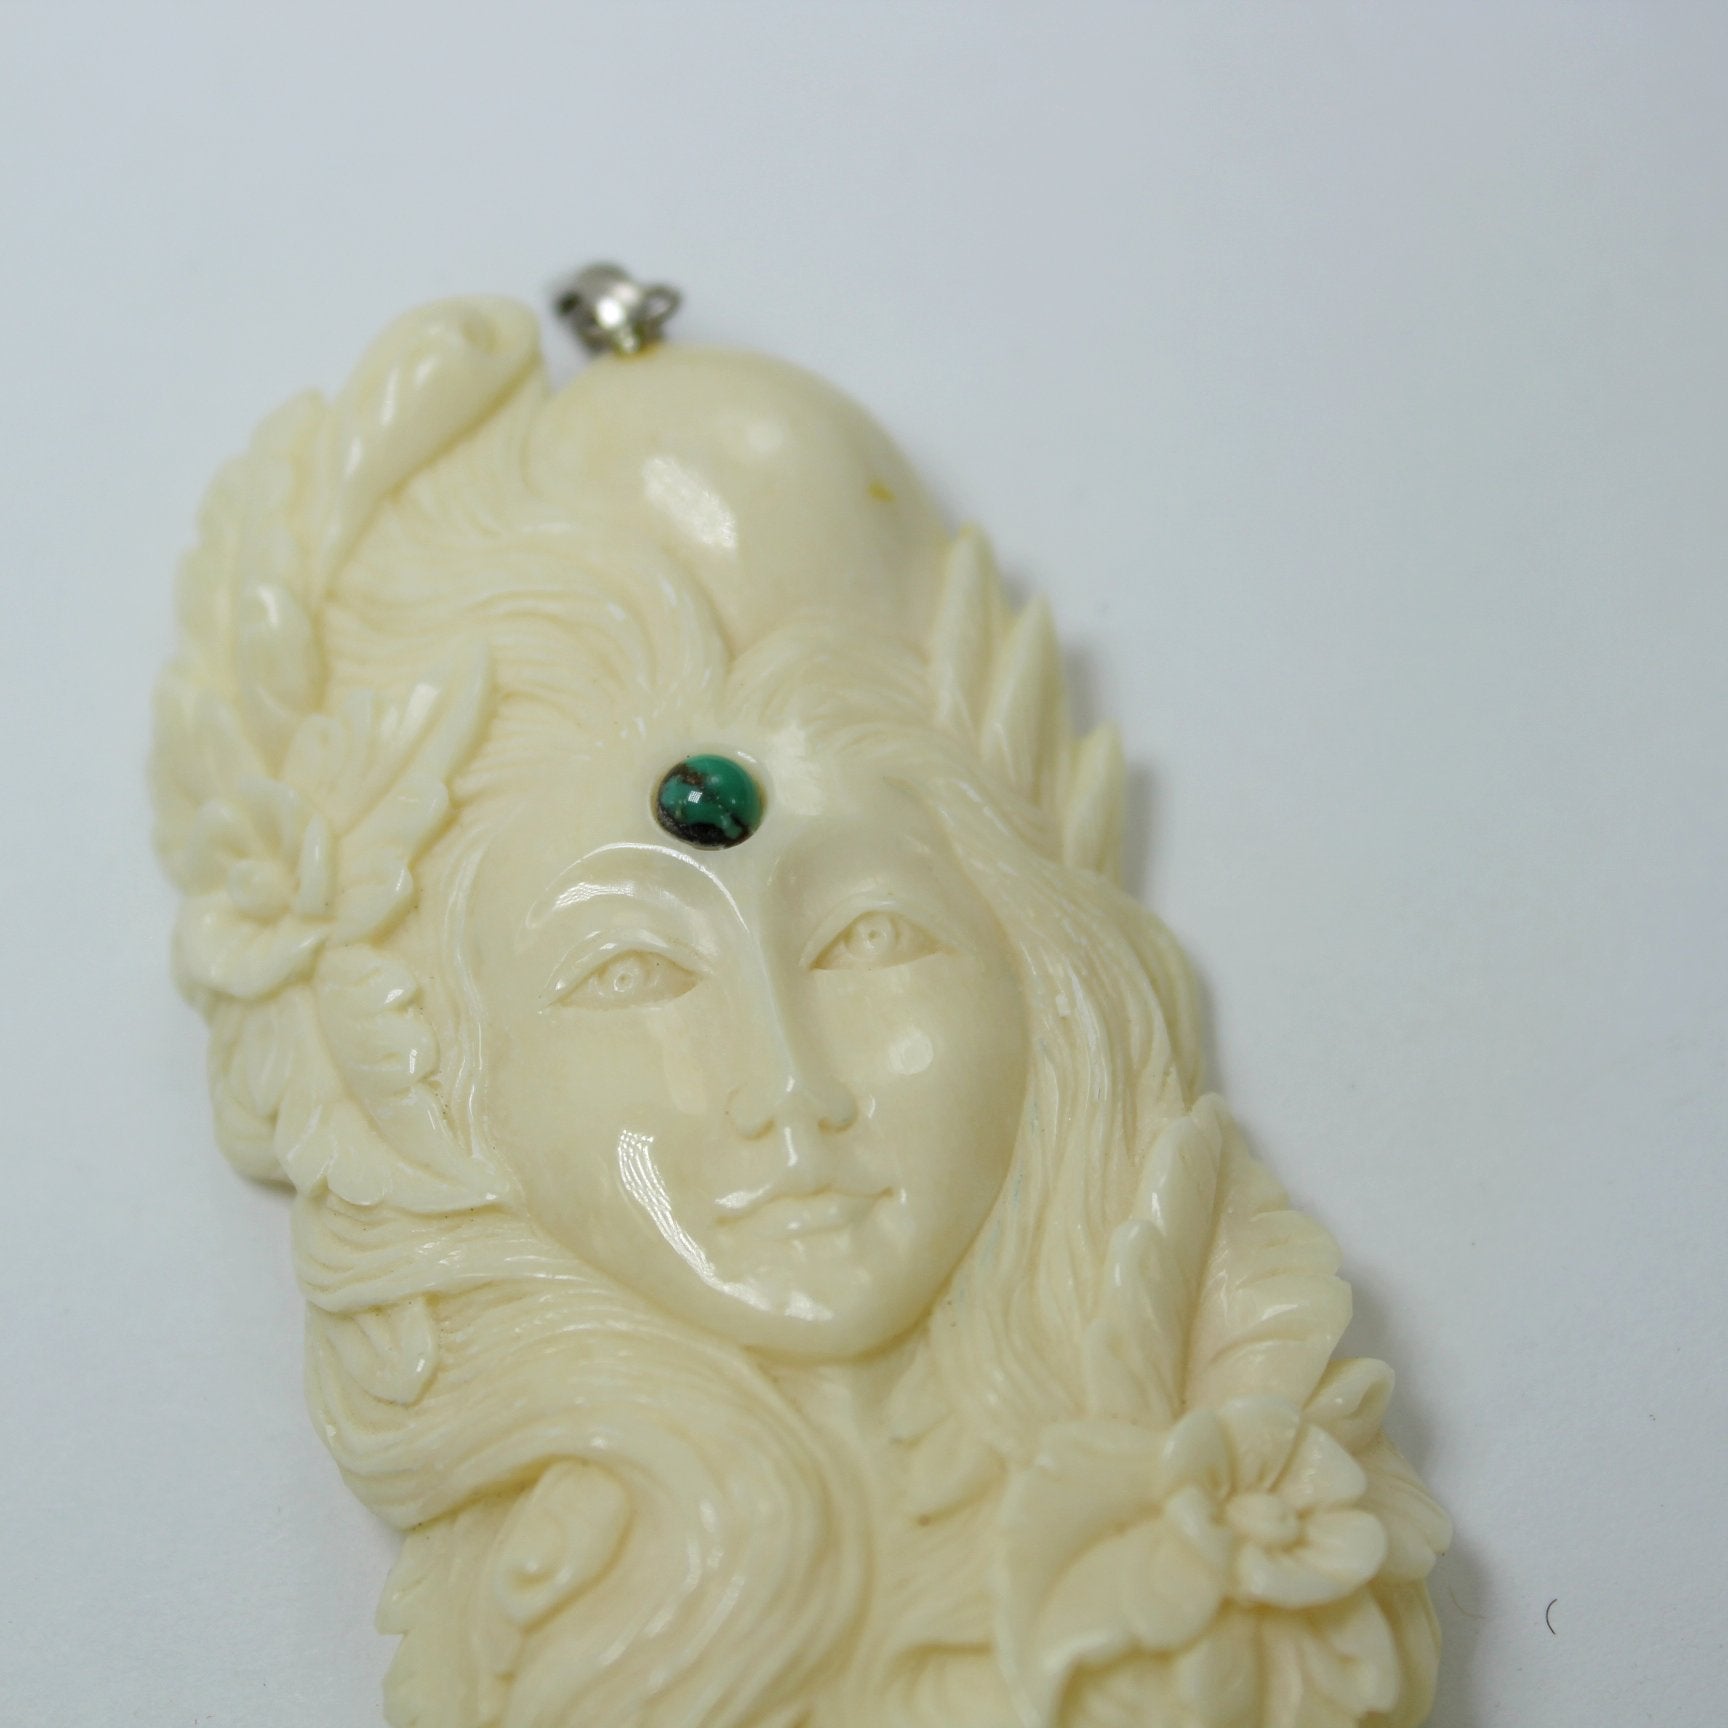 Pendant Carved Bone Lovely Face Flowers Forehead Stone 925 Bail Long 2 3/4" closeup of face and stone